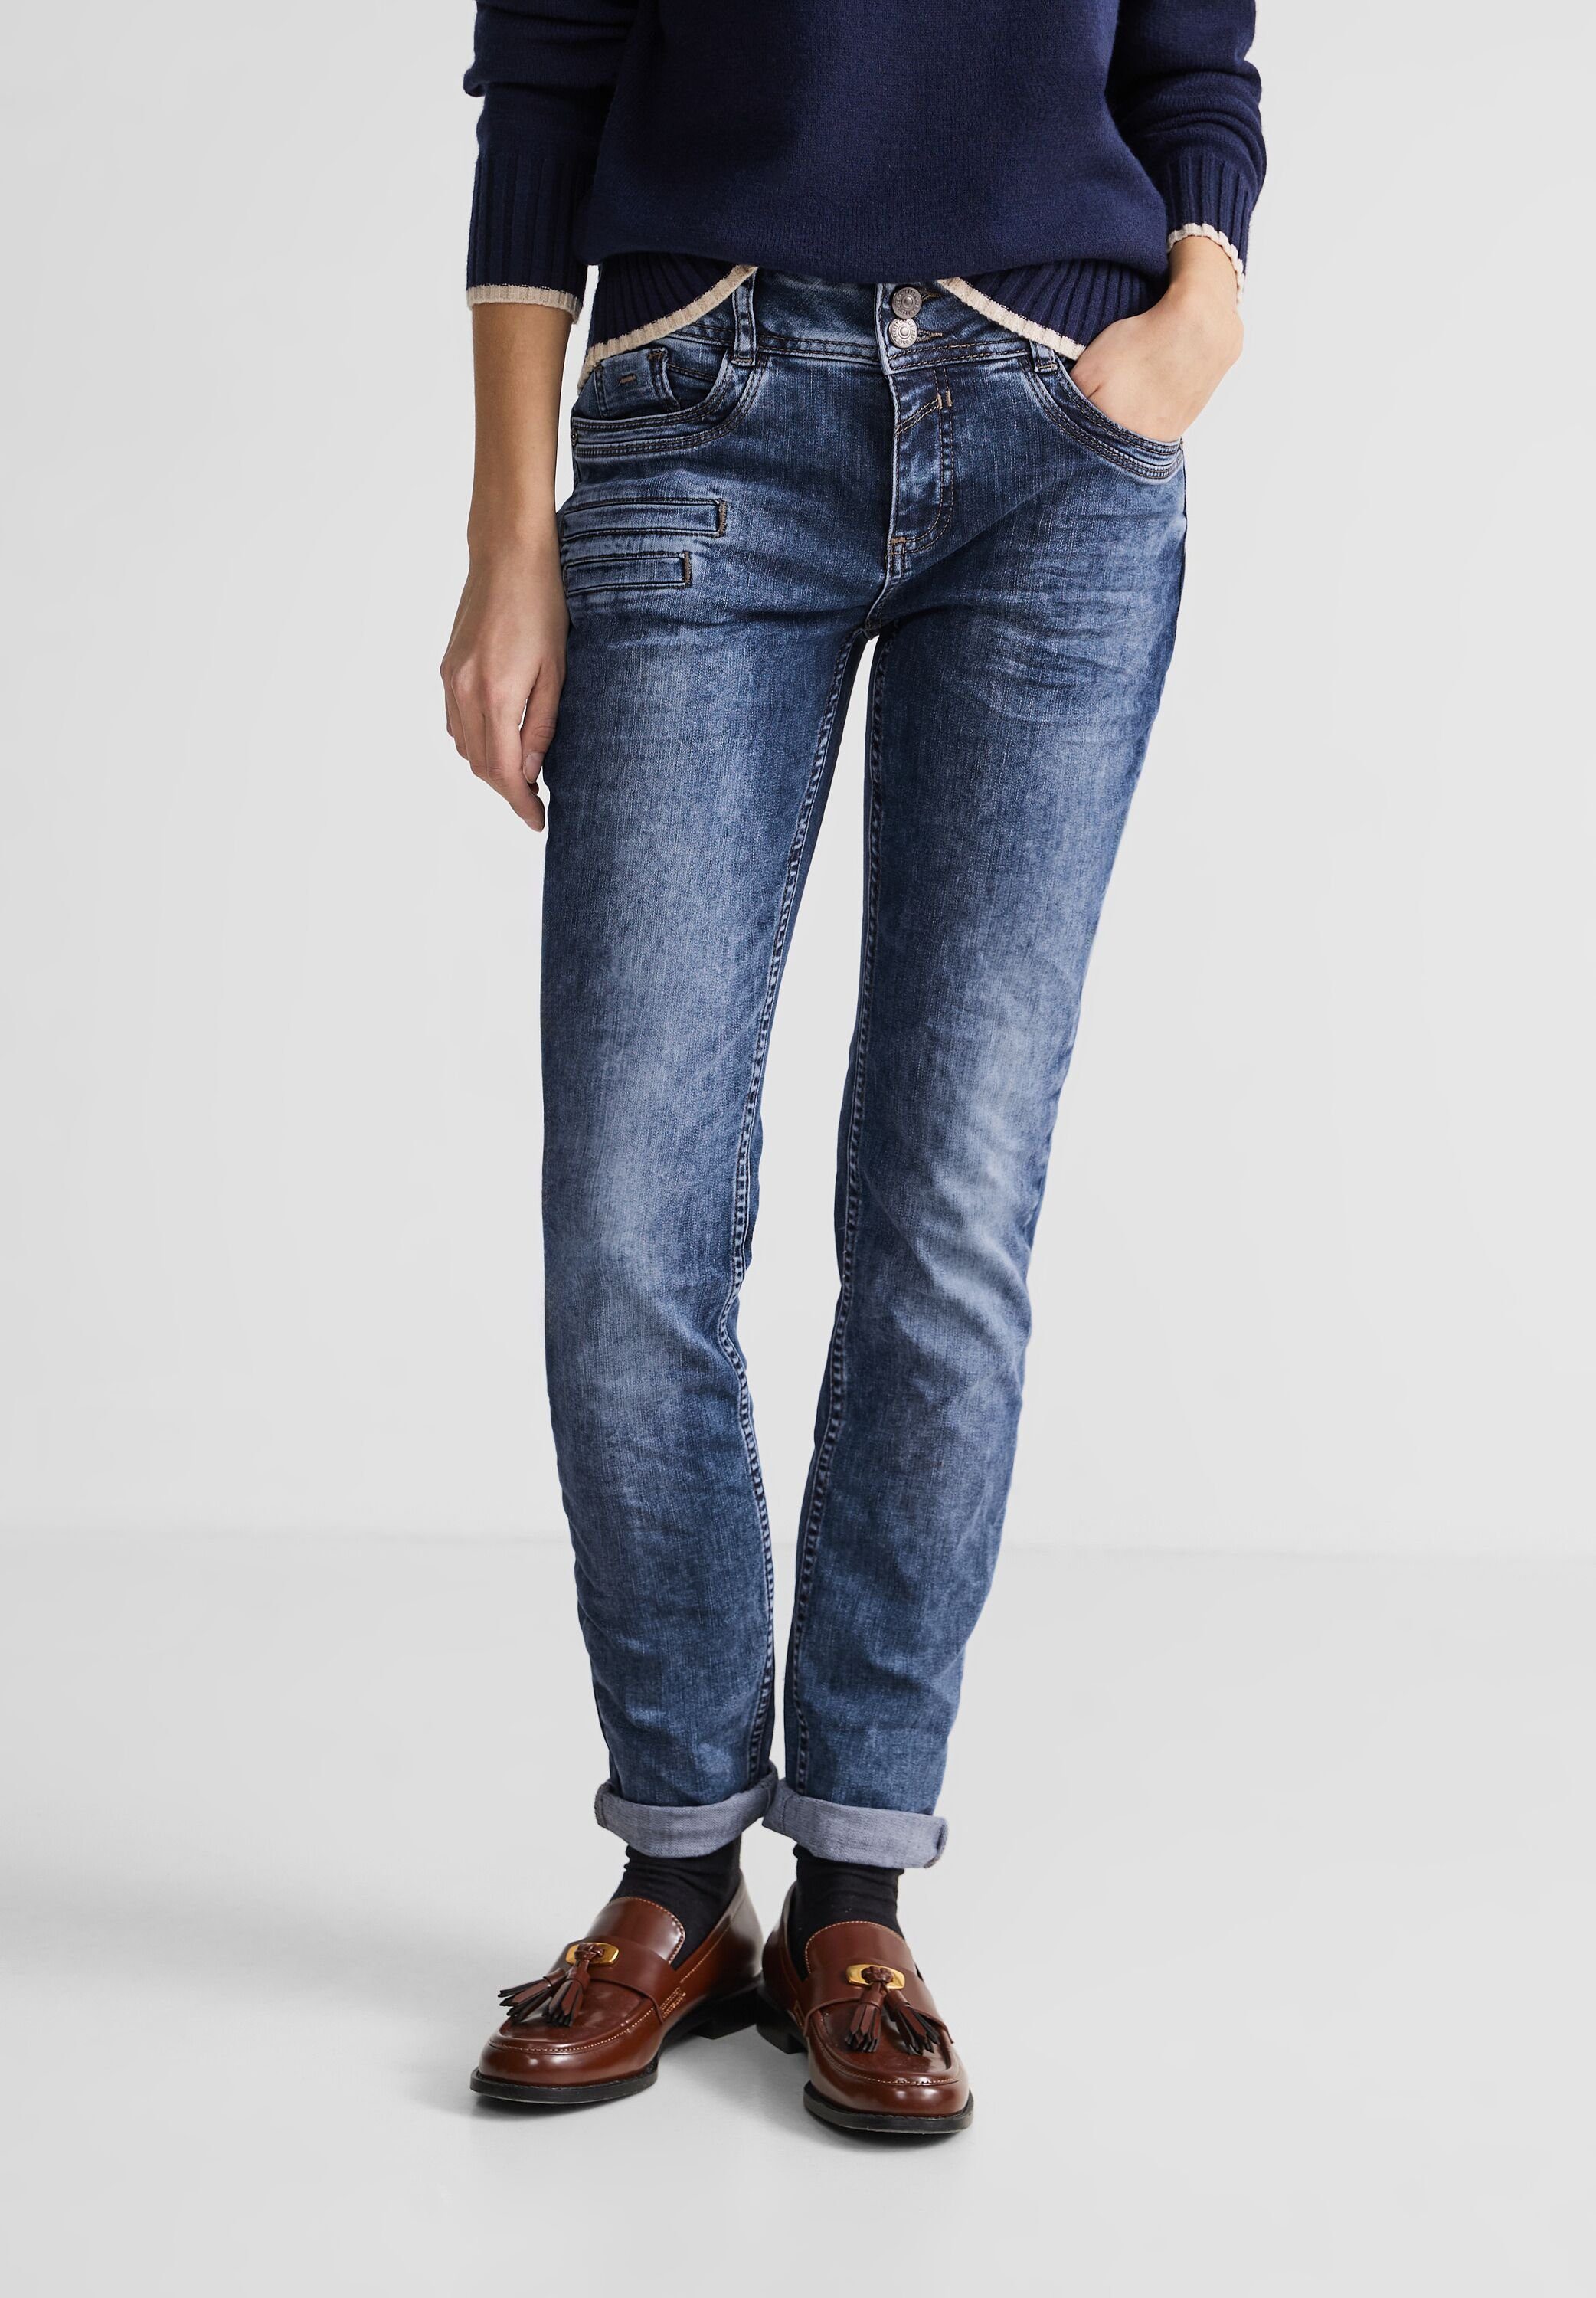 STREET ONE Bequeme Jeans Street One Casual Fit Jeans in Heavy Indigo Wash (1 -tlg) Five Pockets